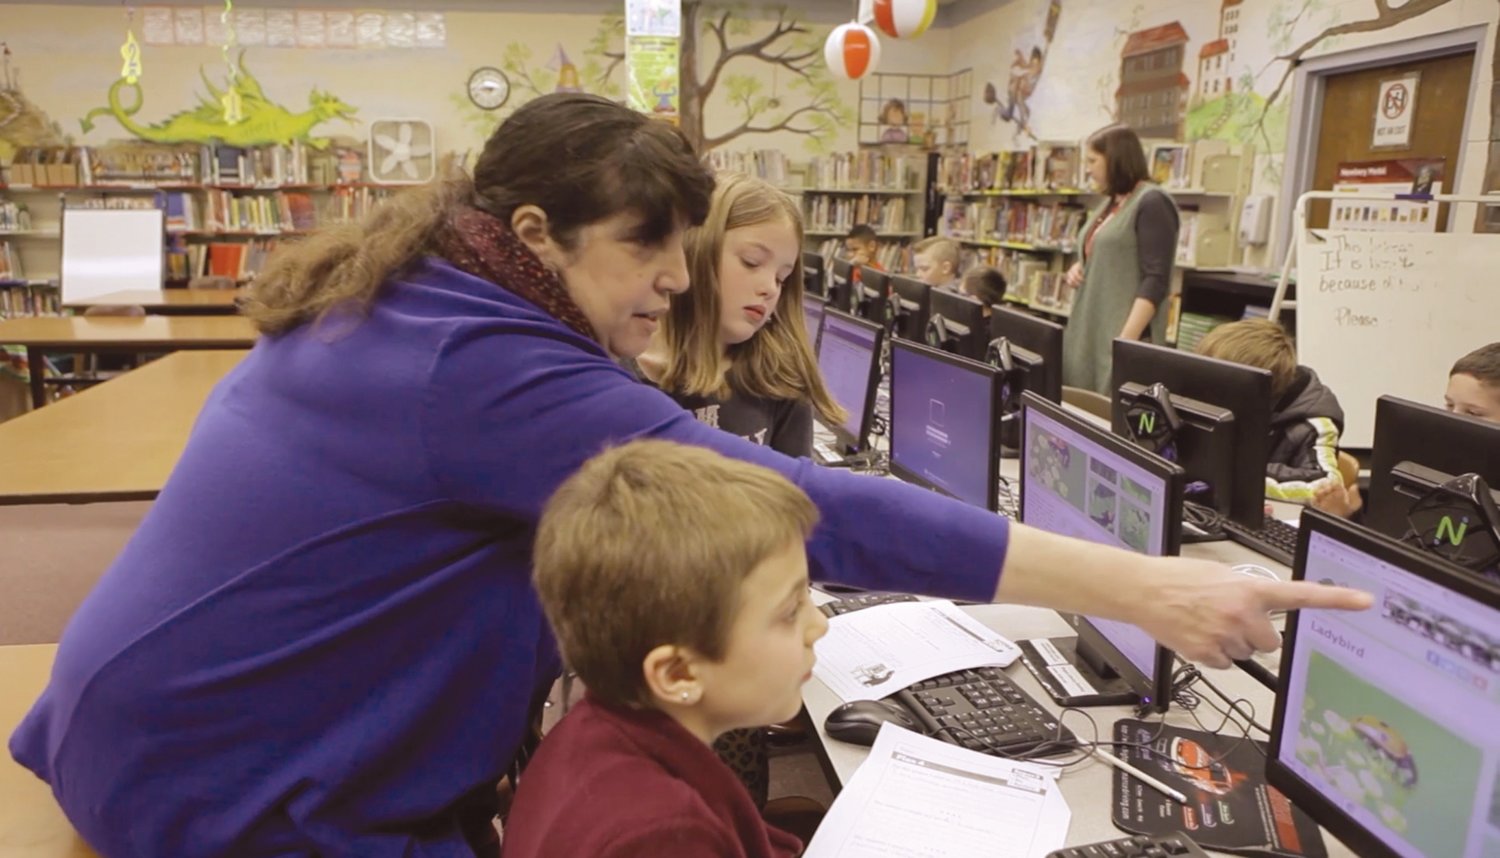 HUBS OF TECHNOLOGY:  Esther Wolk, a school librarian from Coventry, teaches students research skills and how to smartly use resources like Google.